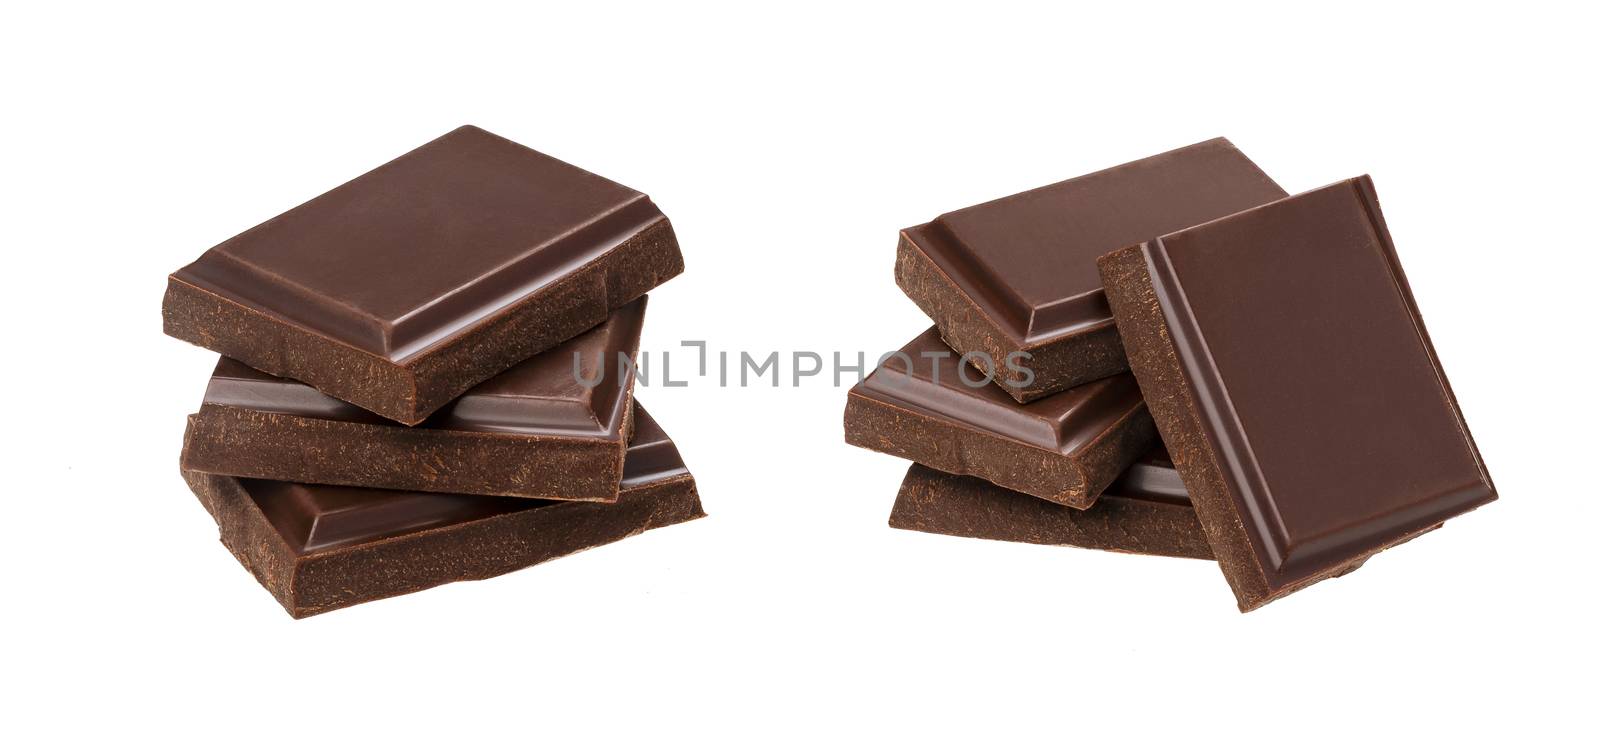 Dark chocolate bars isolated on white background with clipping path, stack of chocolate pieces, closeup